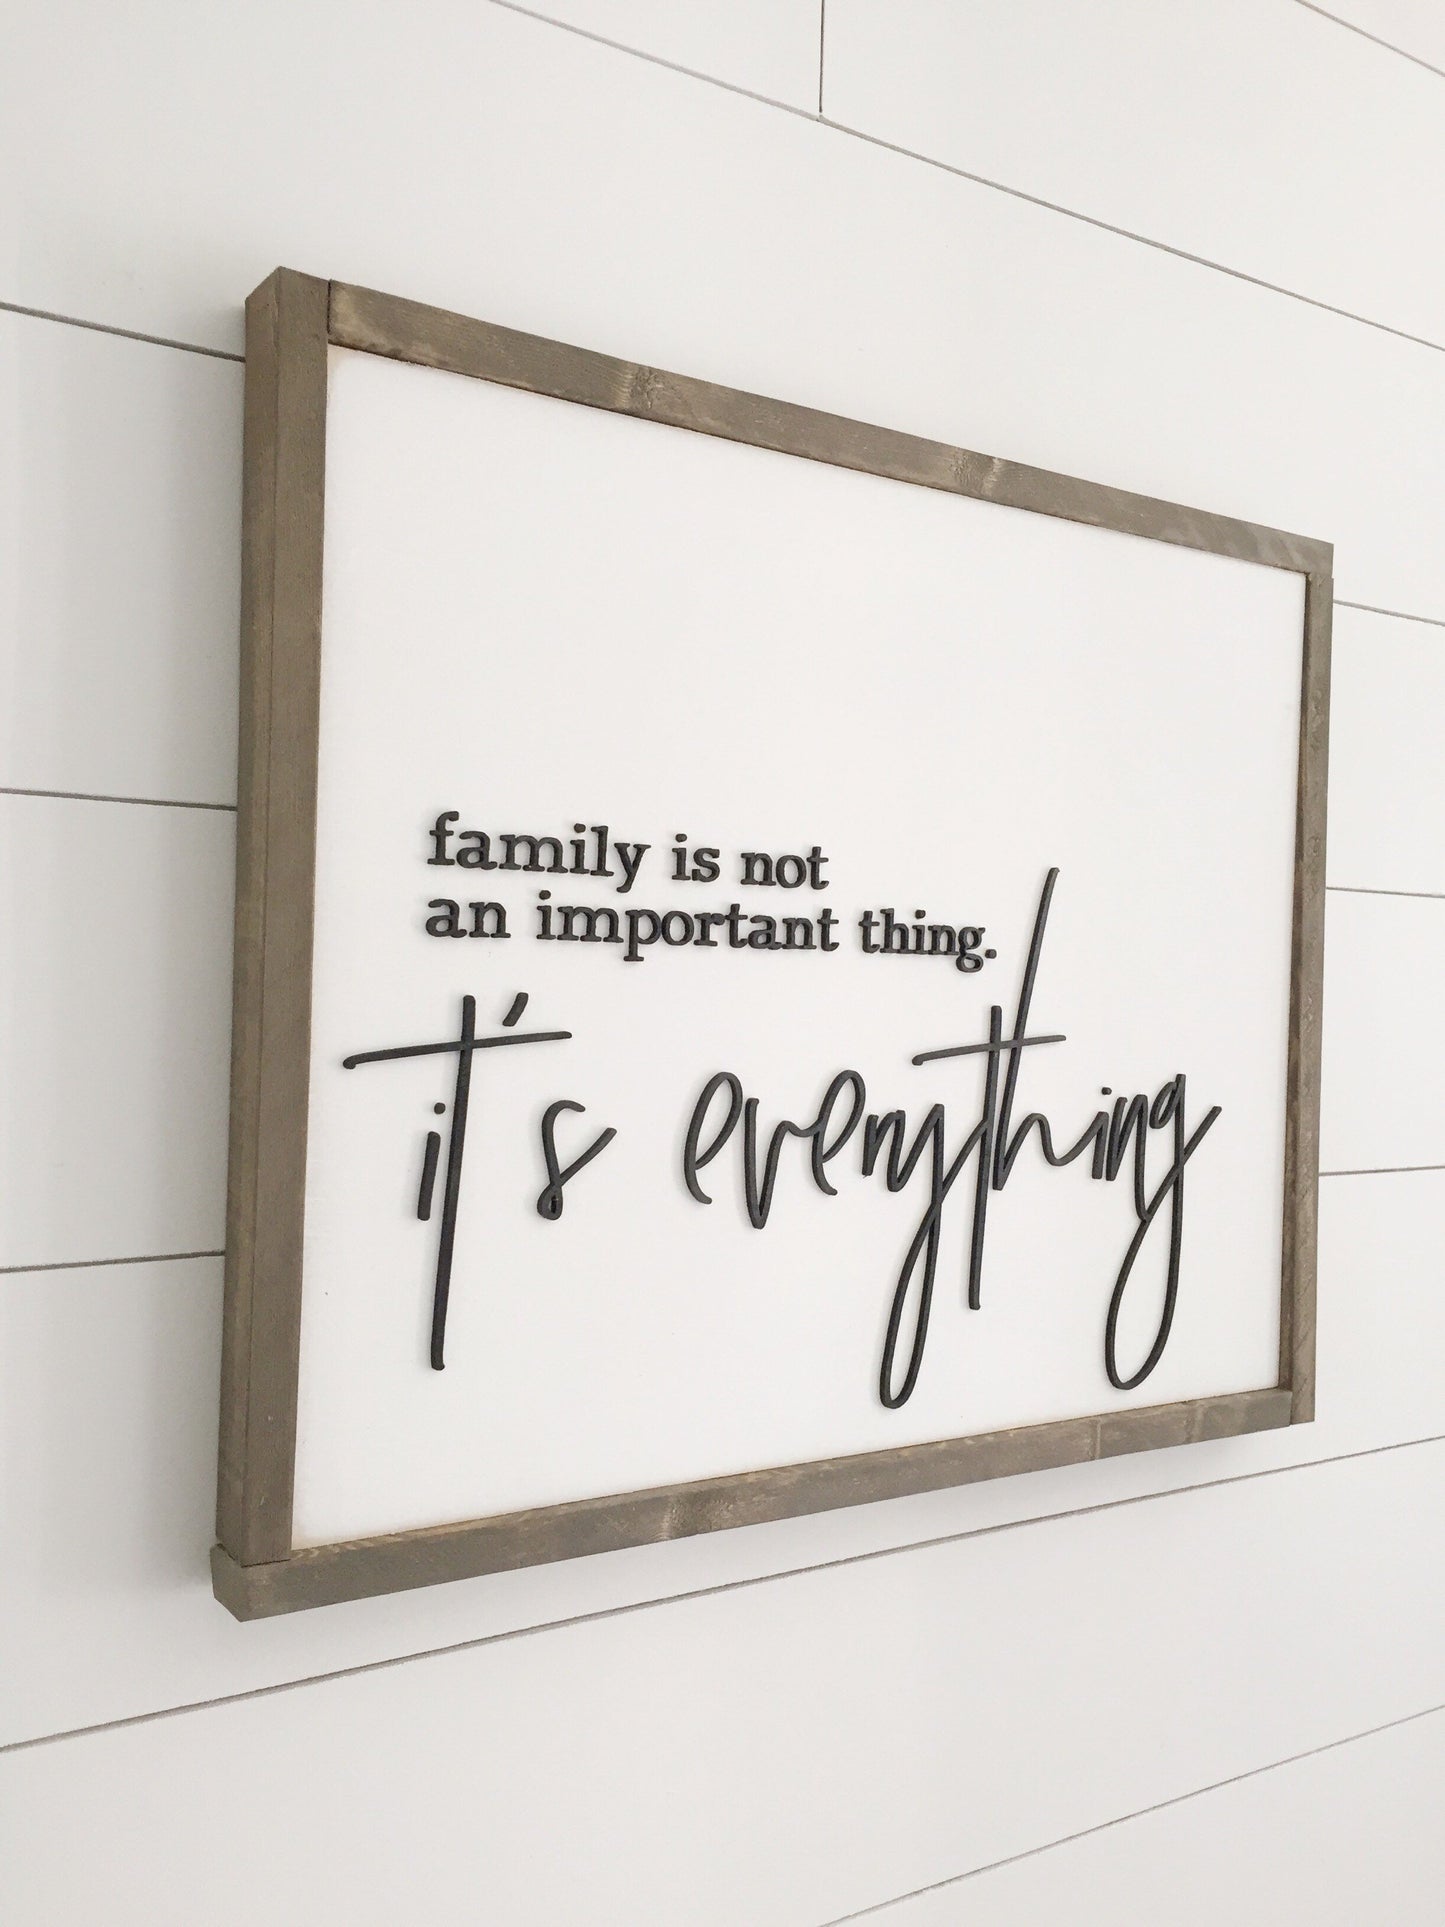 Family isn't an important thing, it's everything | 17x21 inch Wood Frame Sign